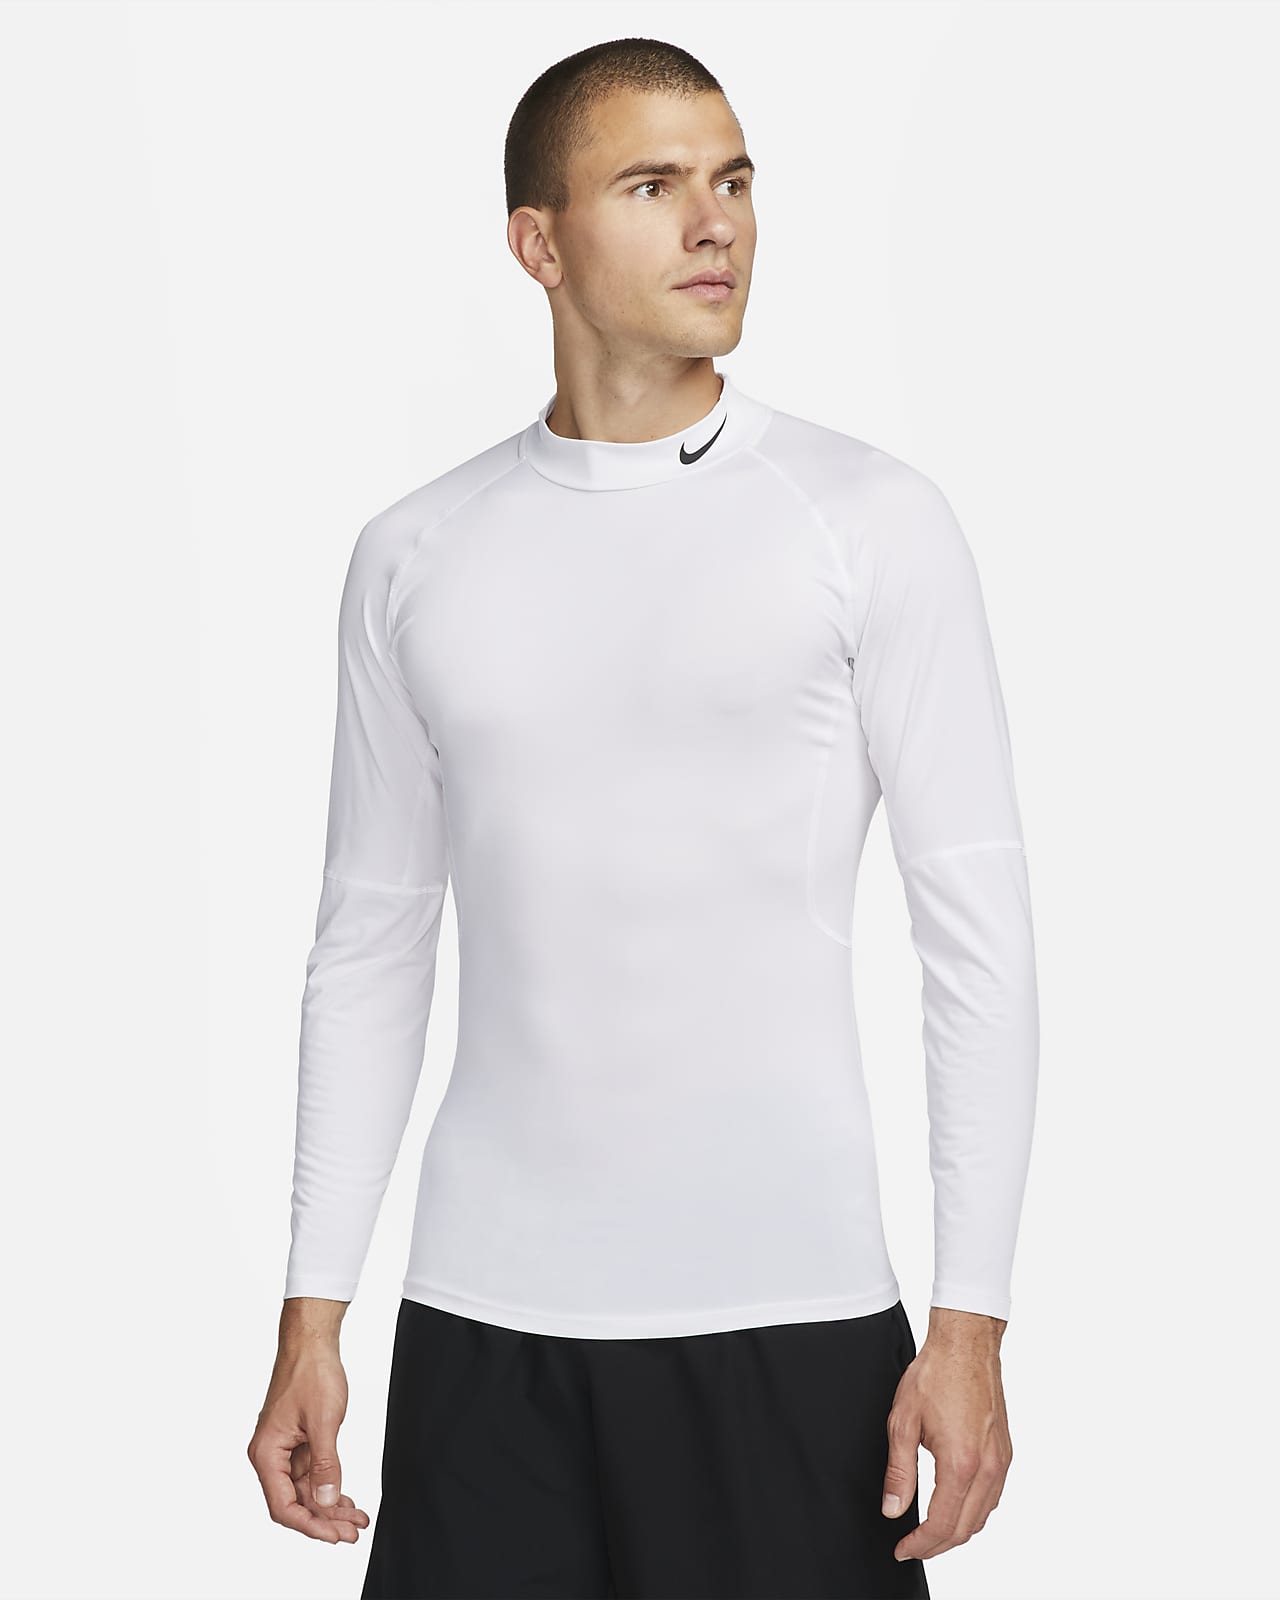 Nike Compression Shirt Review: The Right Choice for a Workout?